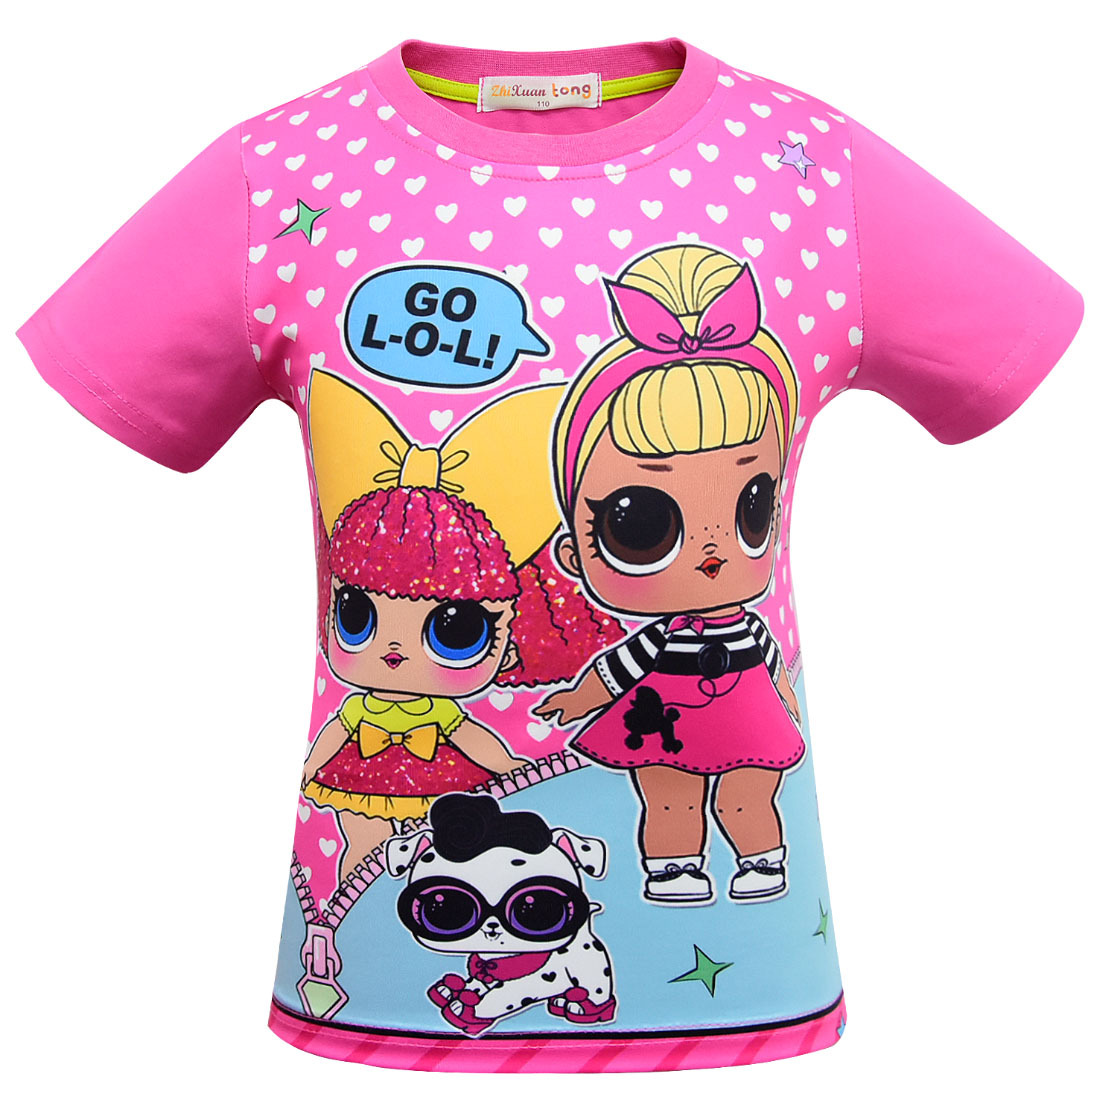 New LOL Girls Surprise Doll Cartoon T shirts Casual Tops Clothes